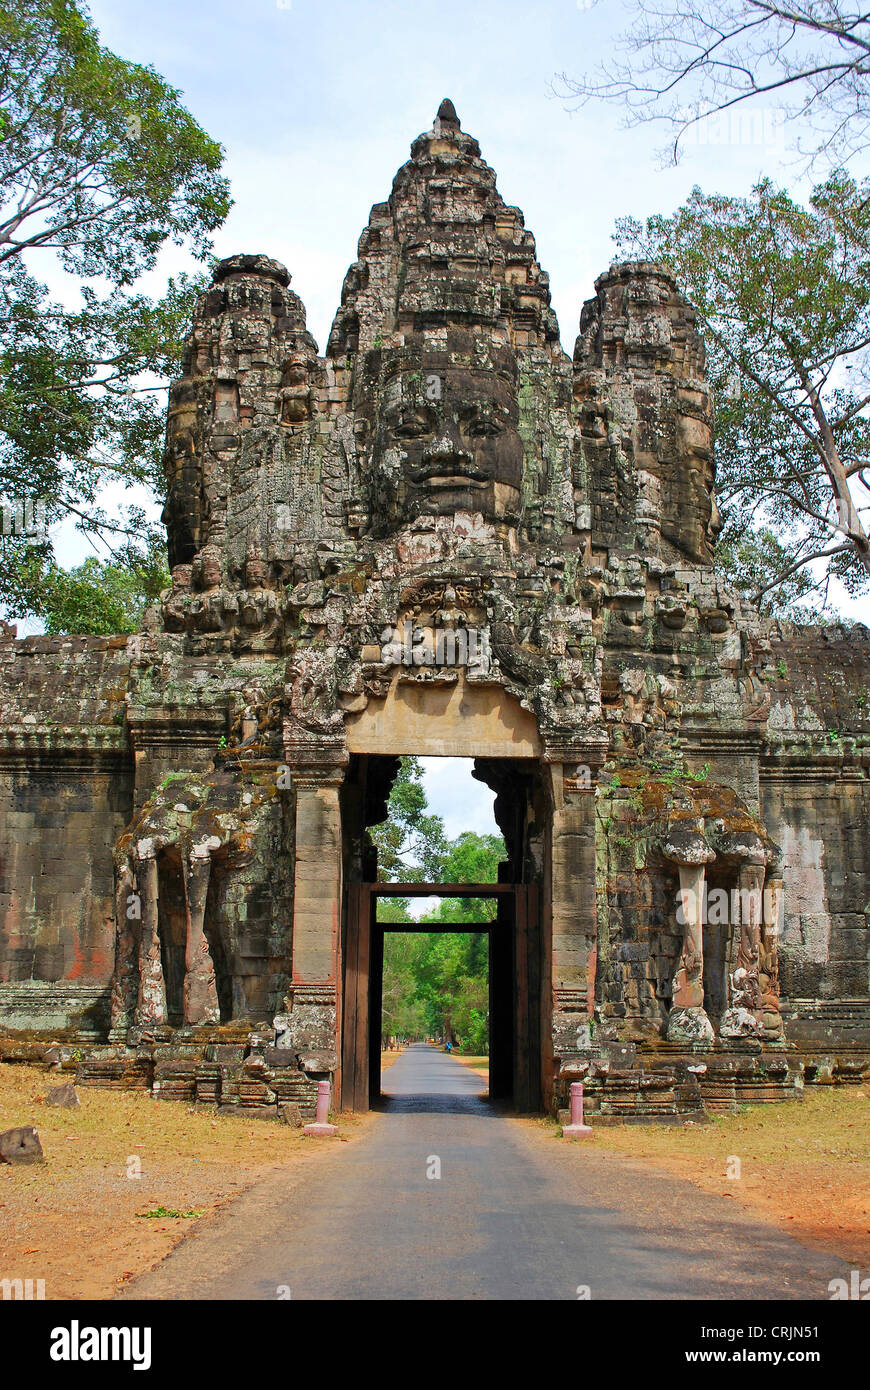 faces of the bodhisattva Lokesvara at the porch to the temple complex Angkor Wat, Cambodia Stock Photo